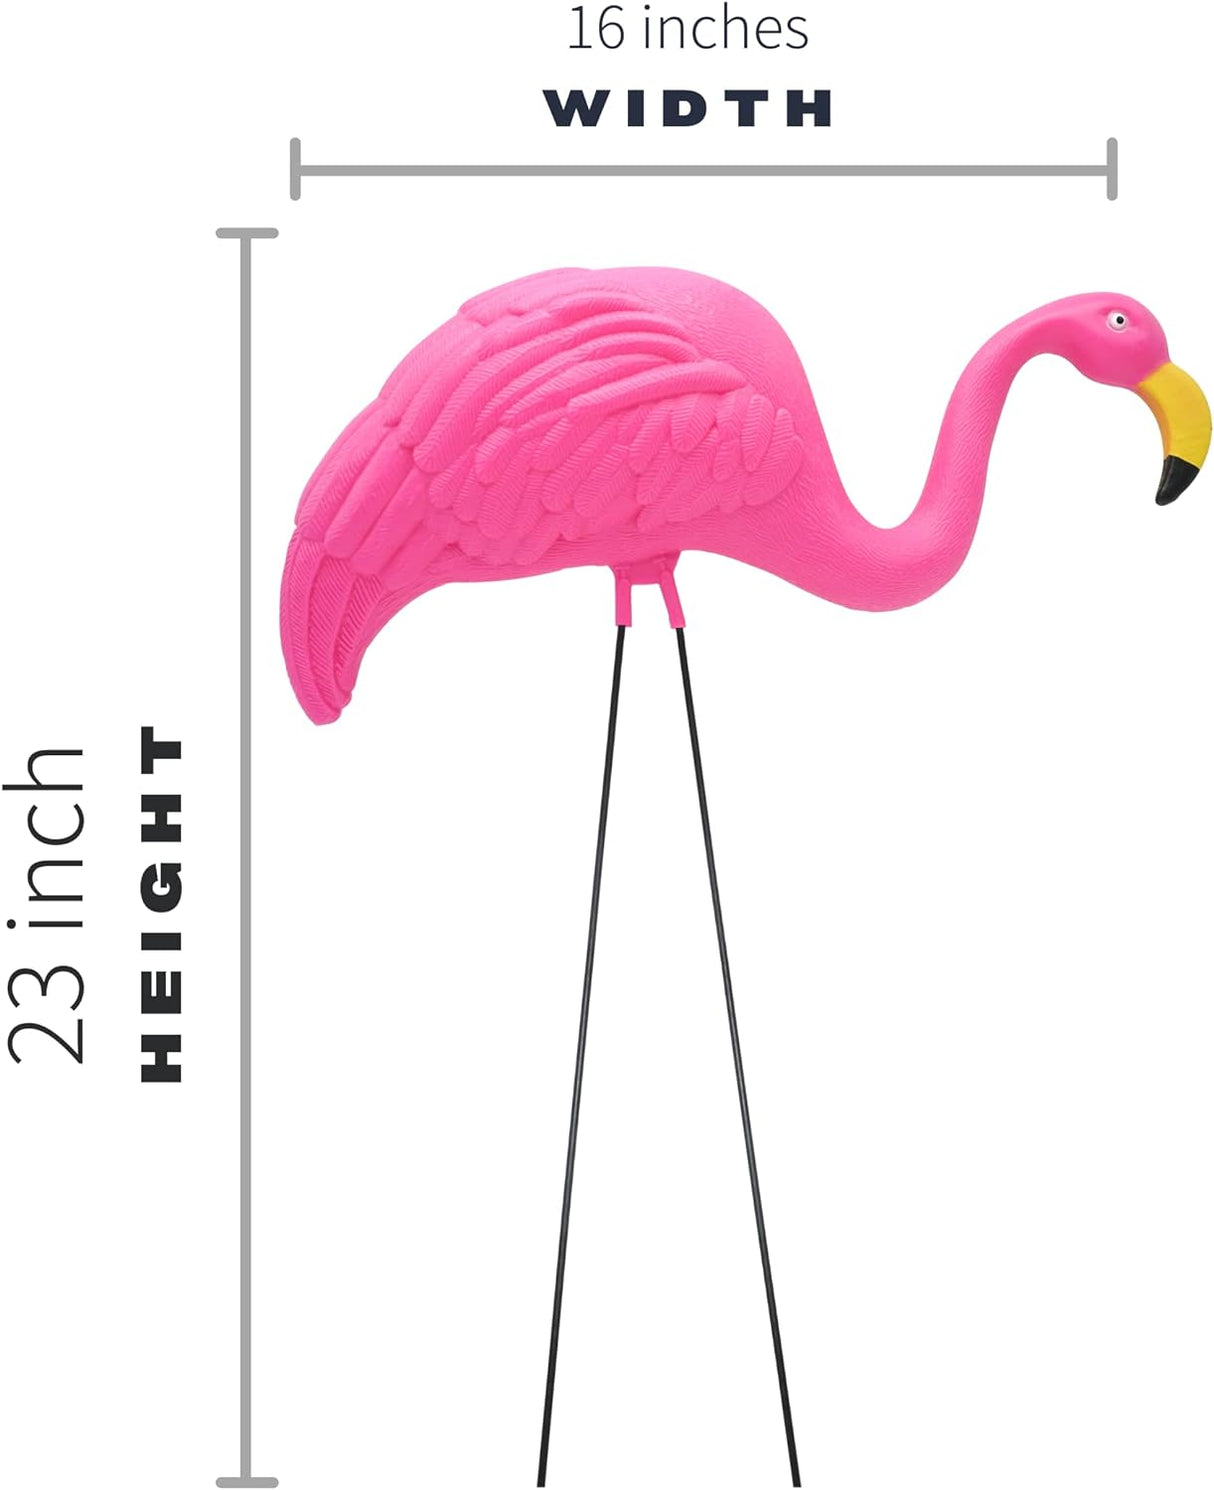 4 Pink Flamingos Yard Decorations - Large 23 inch Ornament Statues - Outdoor Garden Lawn Flamingo Decor by 4E's Novelty